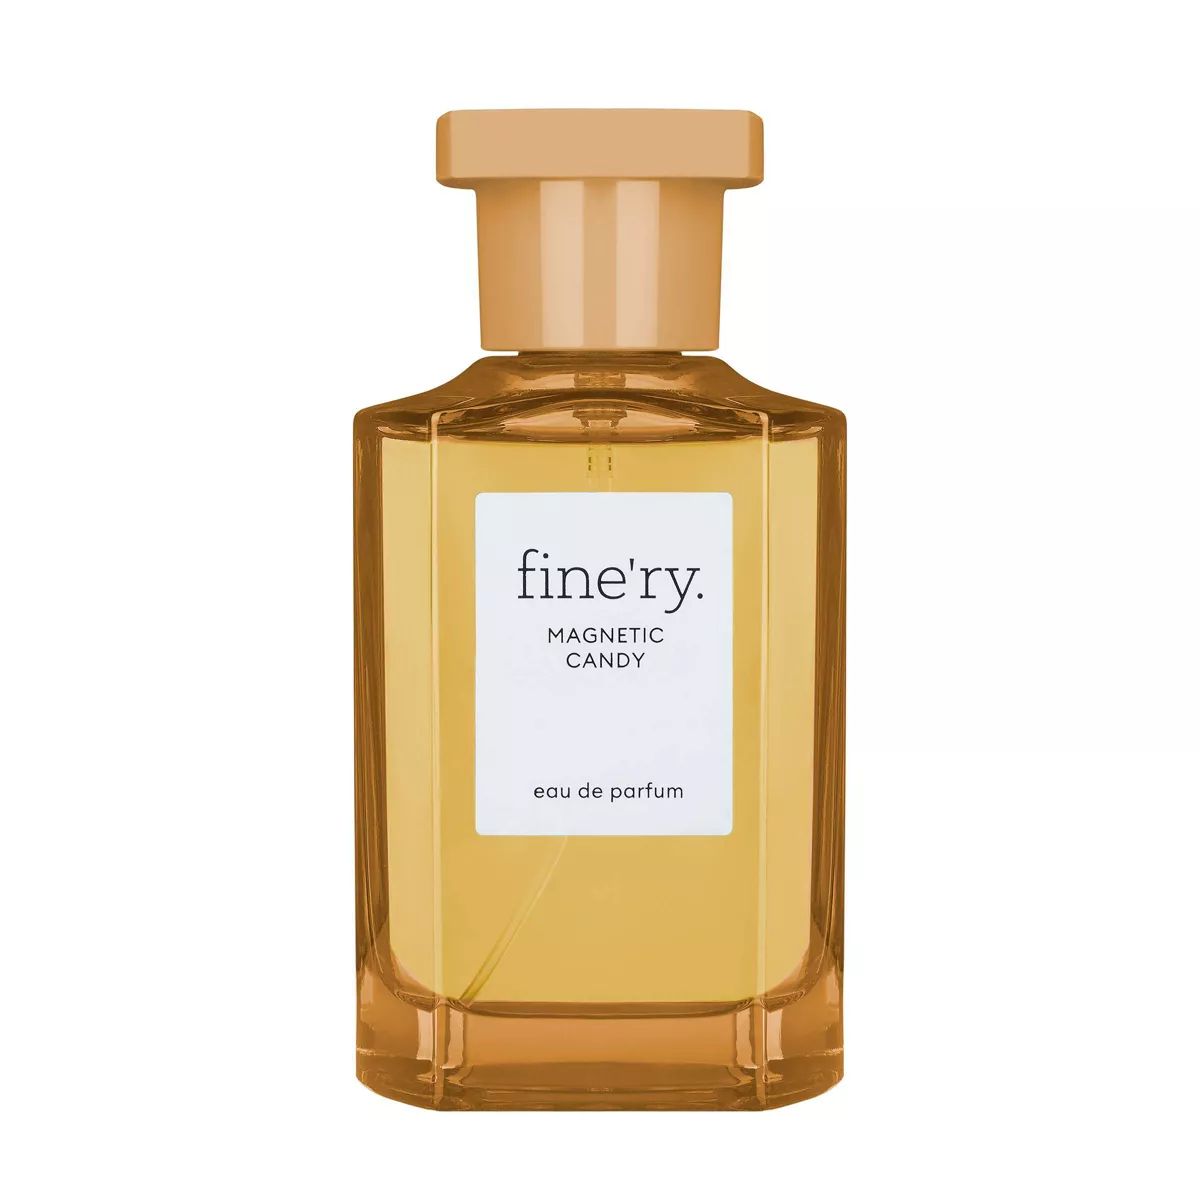 Fine'ry Magnetic Candy Fragrance Perfume - 2.02 fl oz | Target